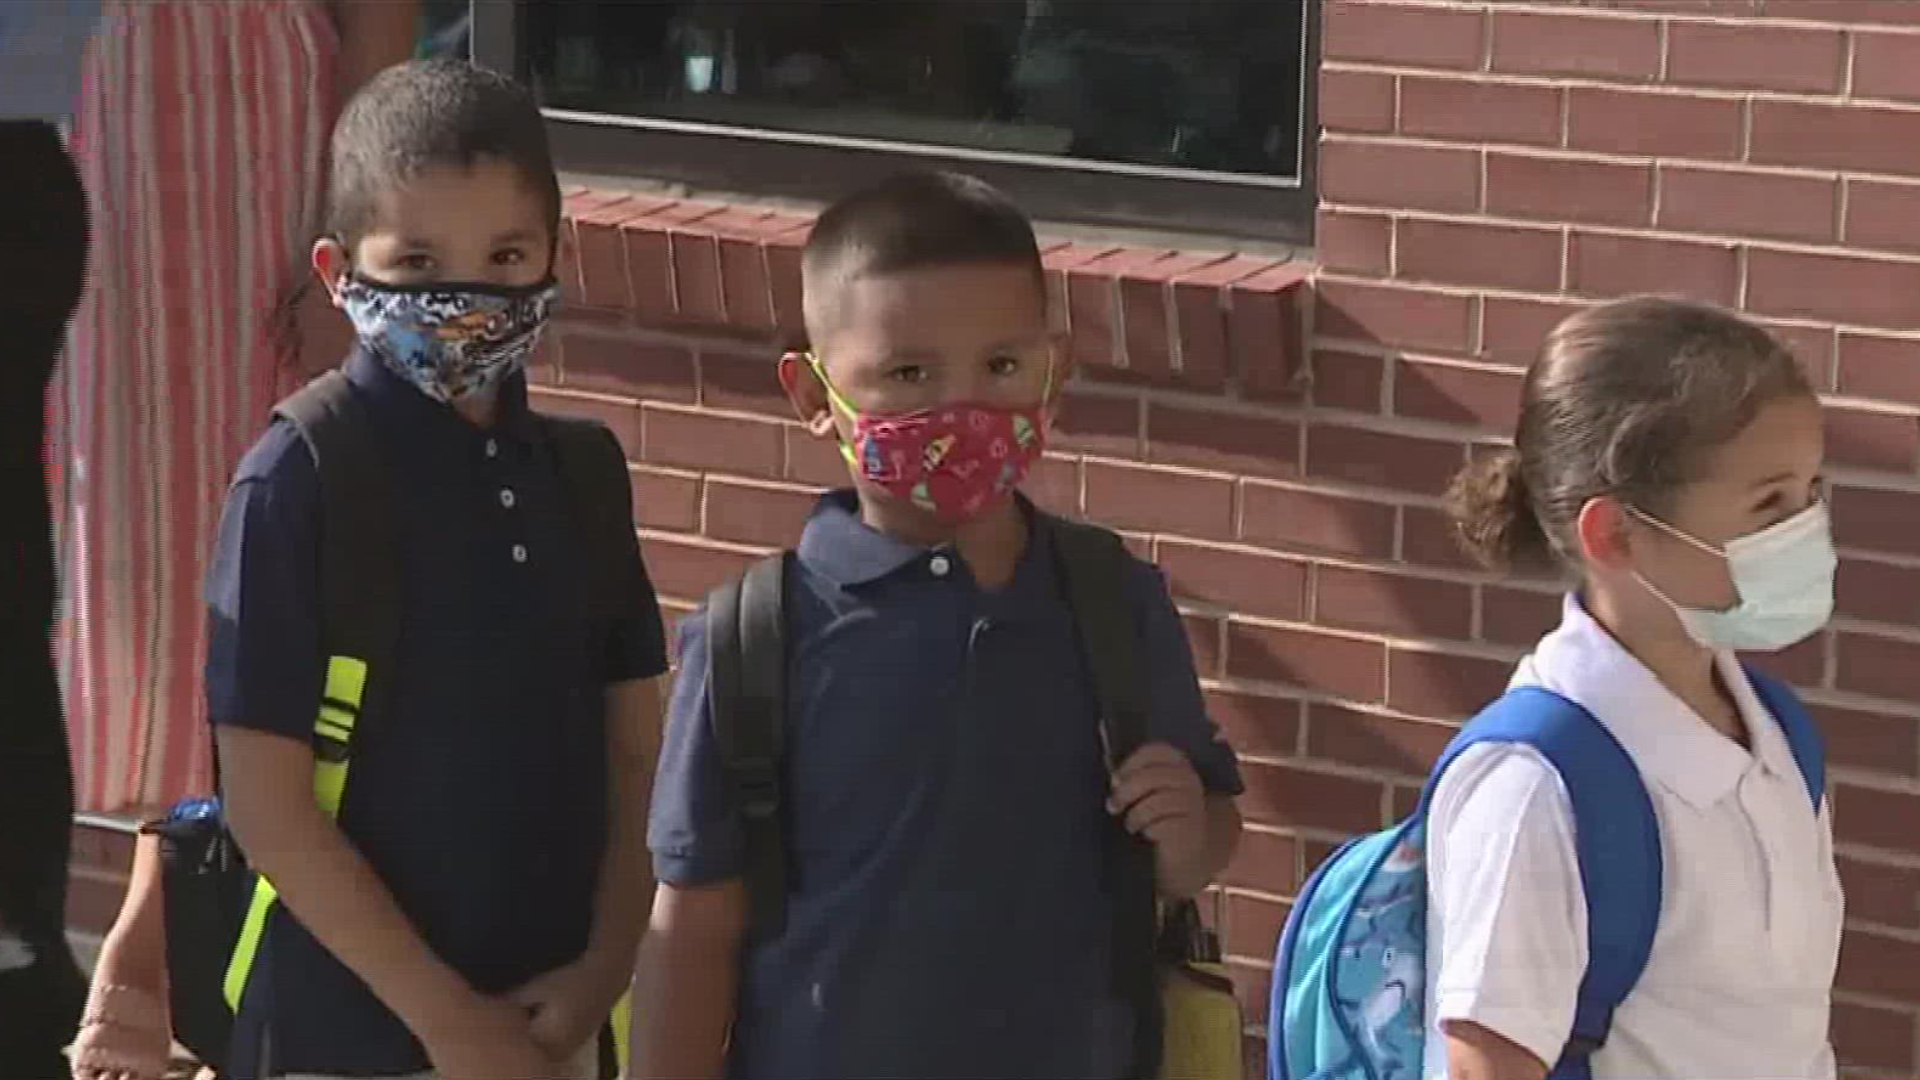 The Department of Education is investigating Tennessee and four other states over banned or limited mask requirements in school.